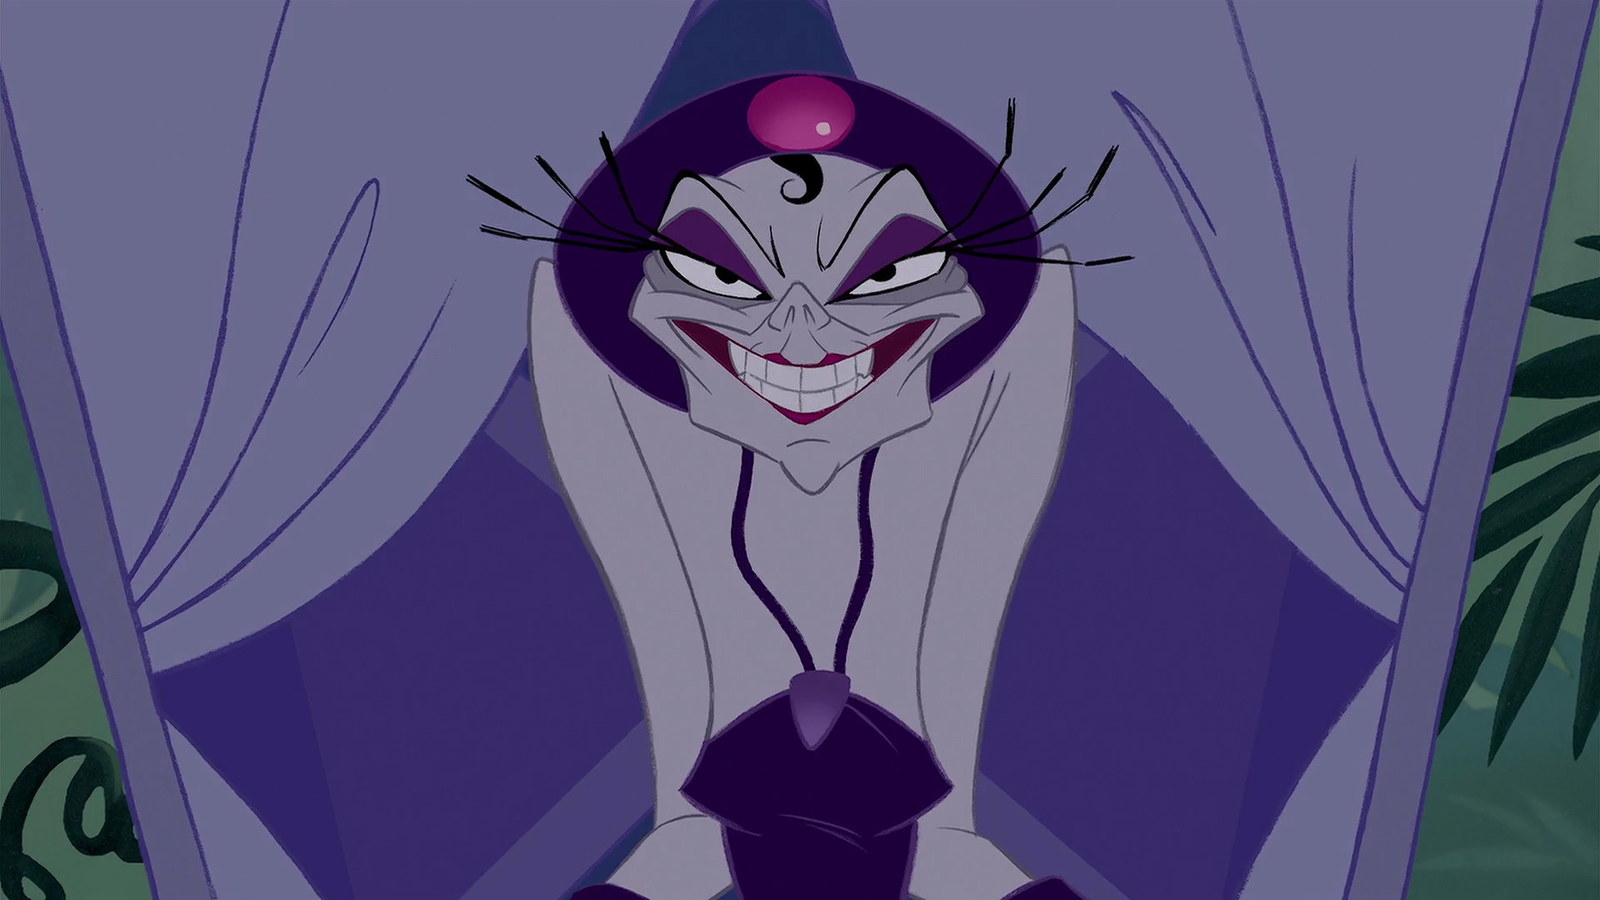 Yzma from The Emperor's New Groove - wide 8